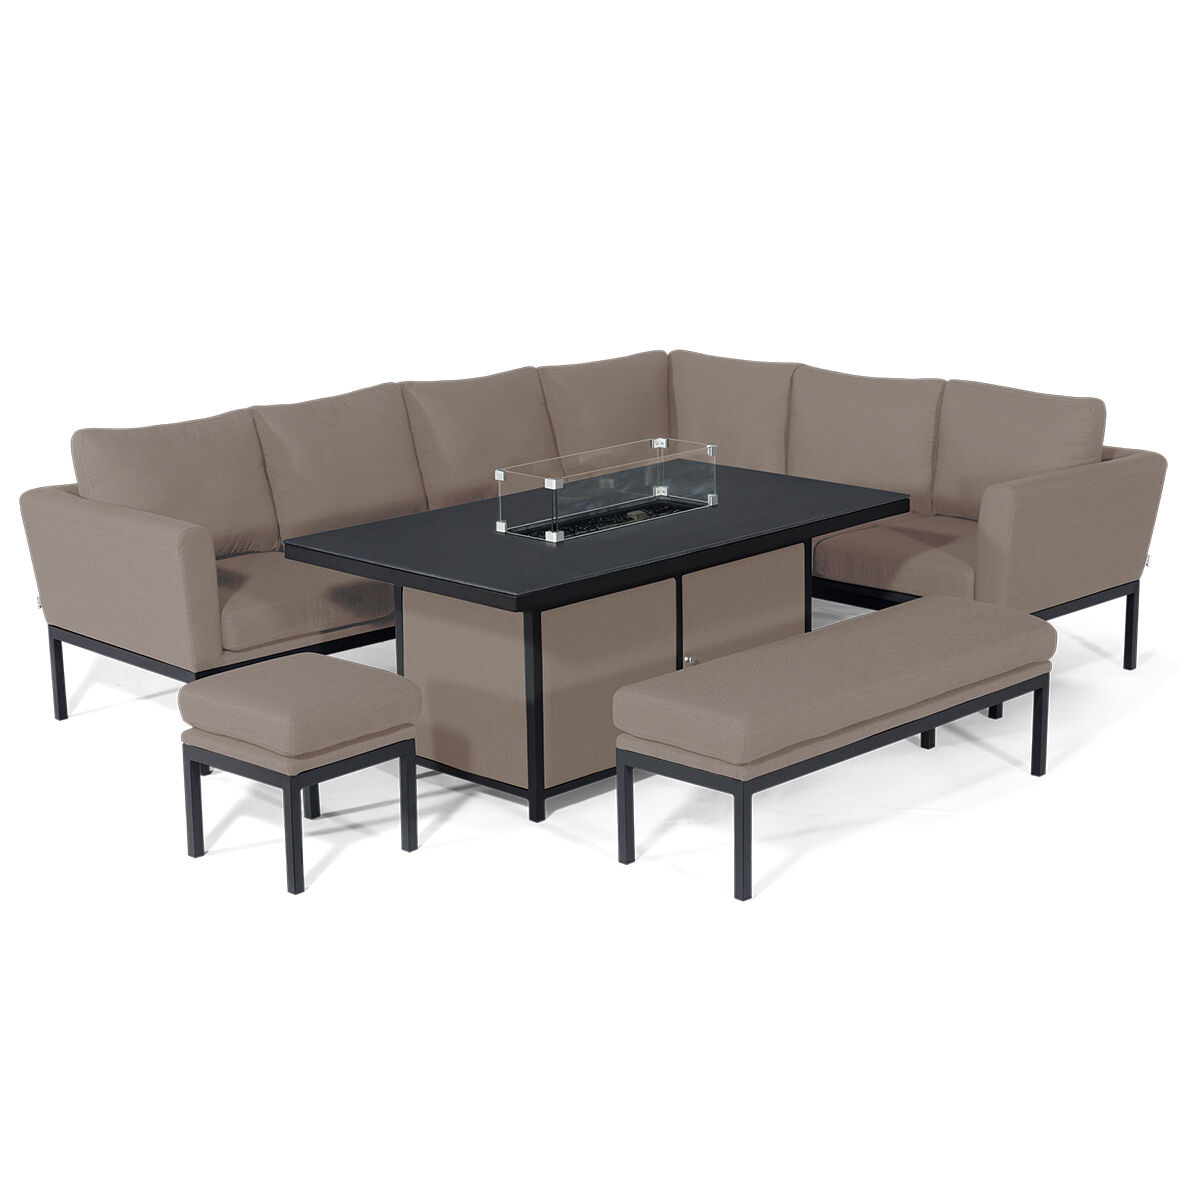 Maze - Outdoor Fabric Pulse Left Handed Corner Dining Set with Fire Pit Table - Taupe product image